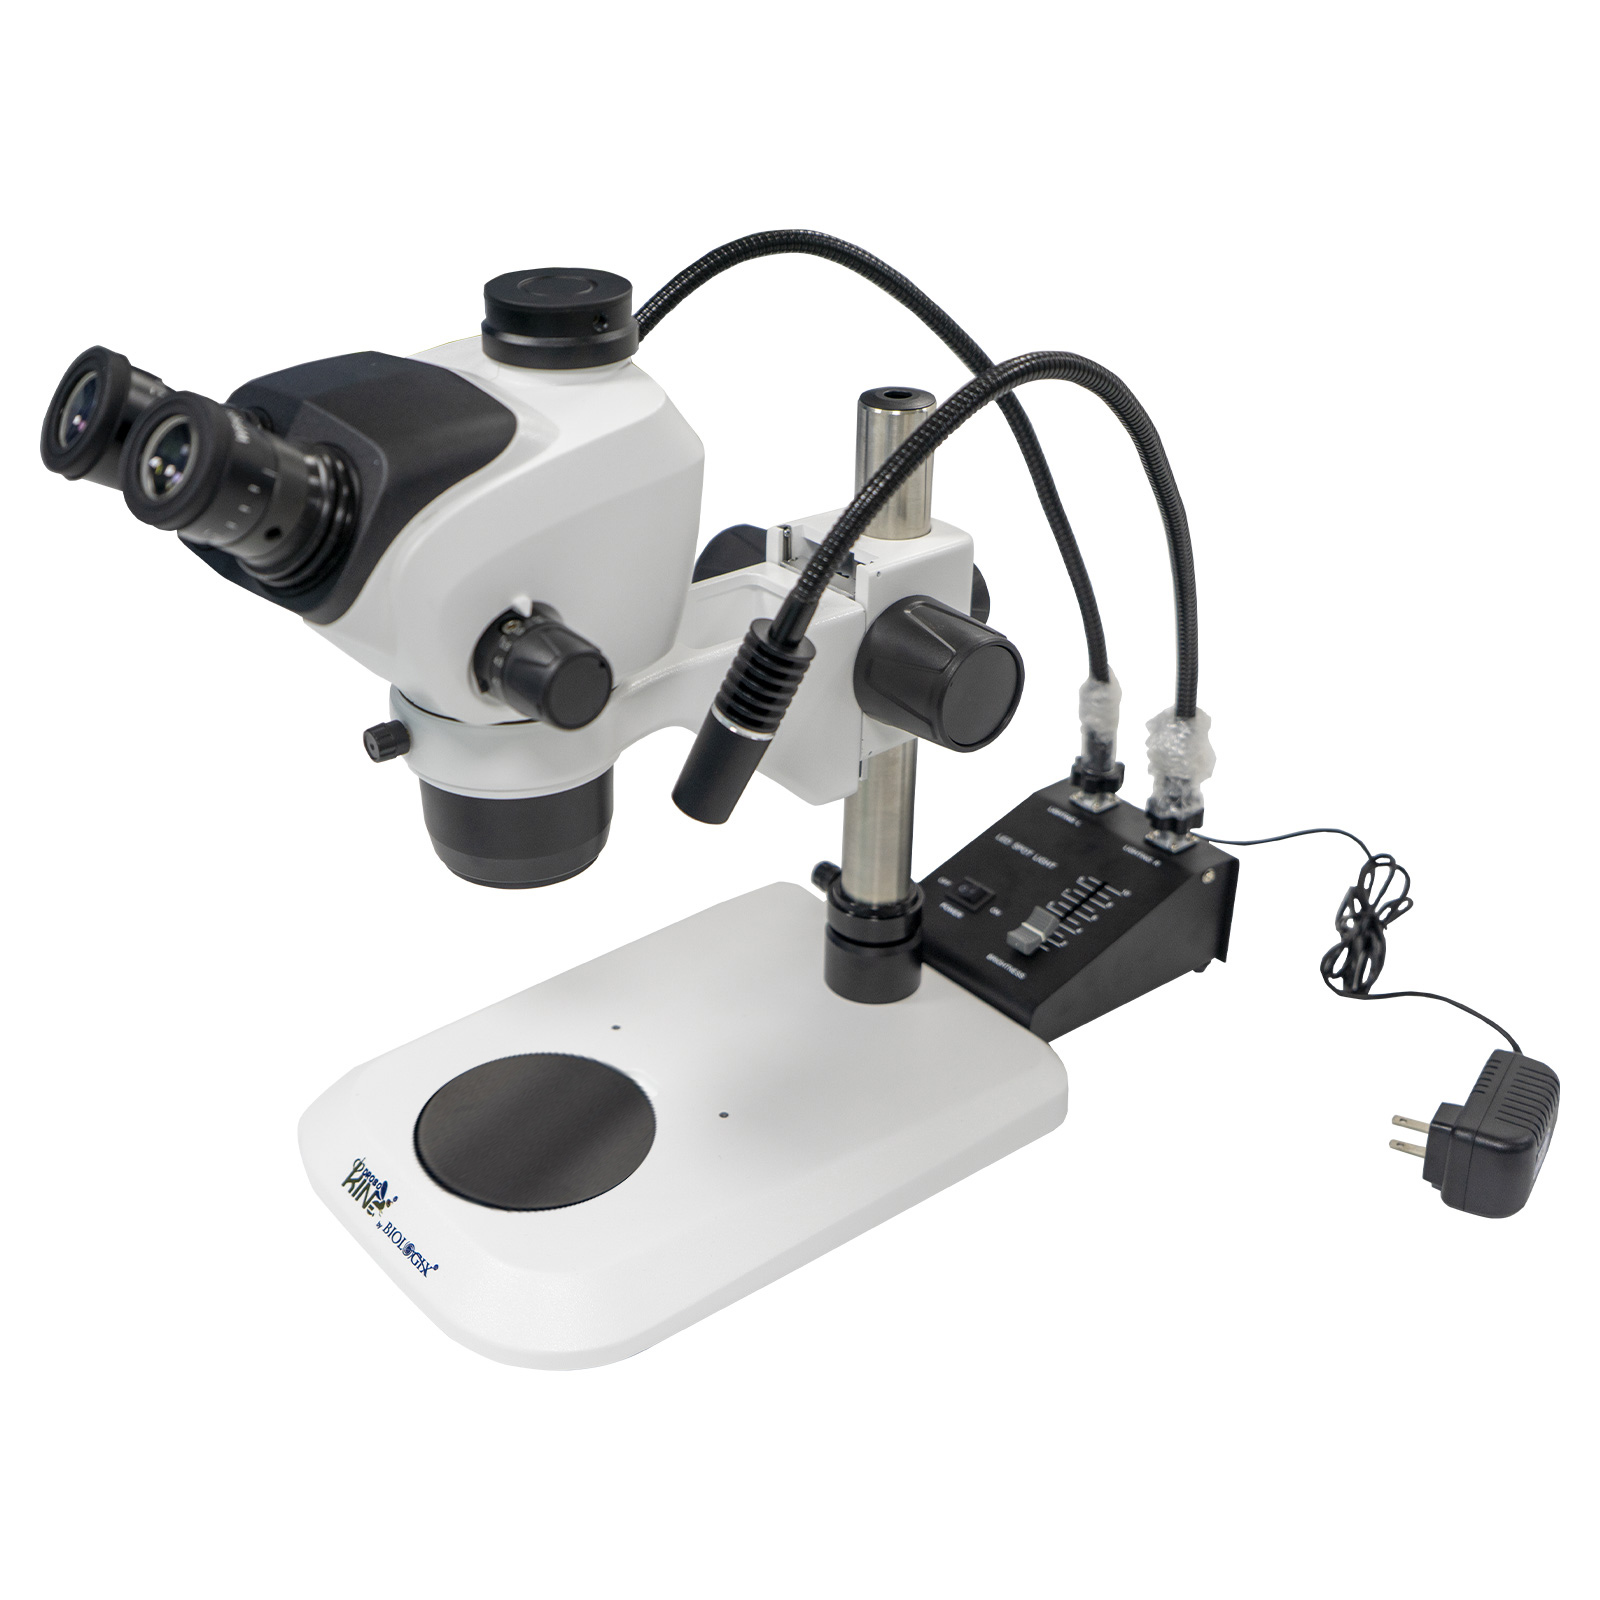 Trinocular Microscope, Eyepiece 10X/23mm, with external double goose tube light source